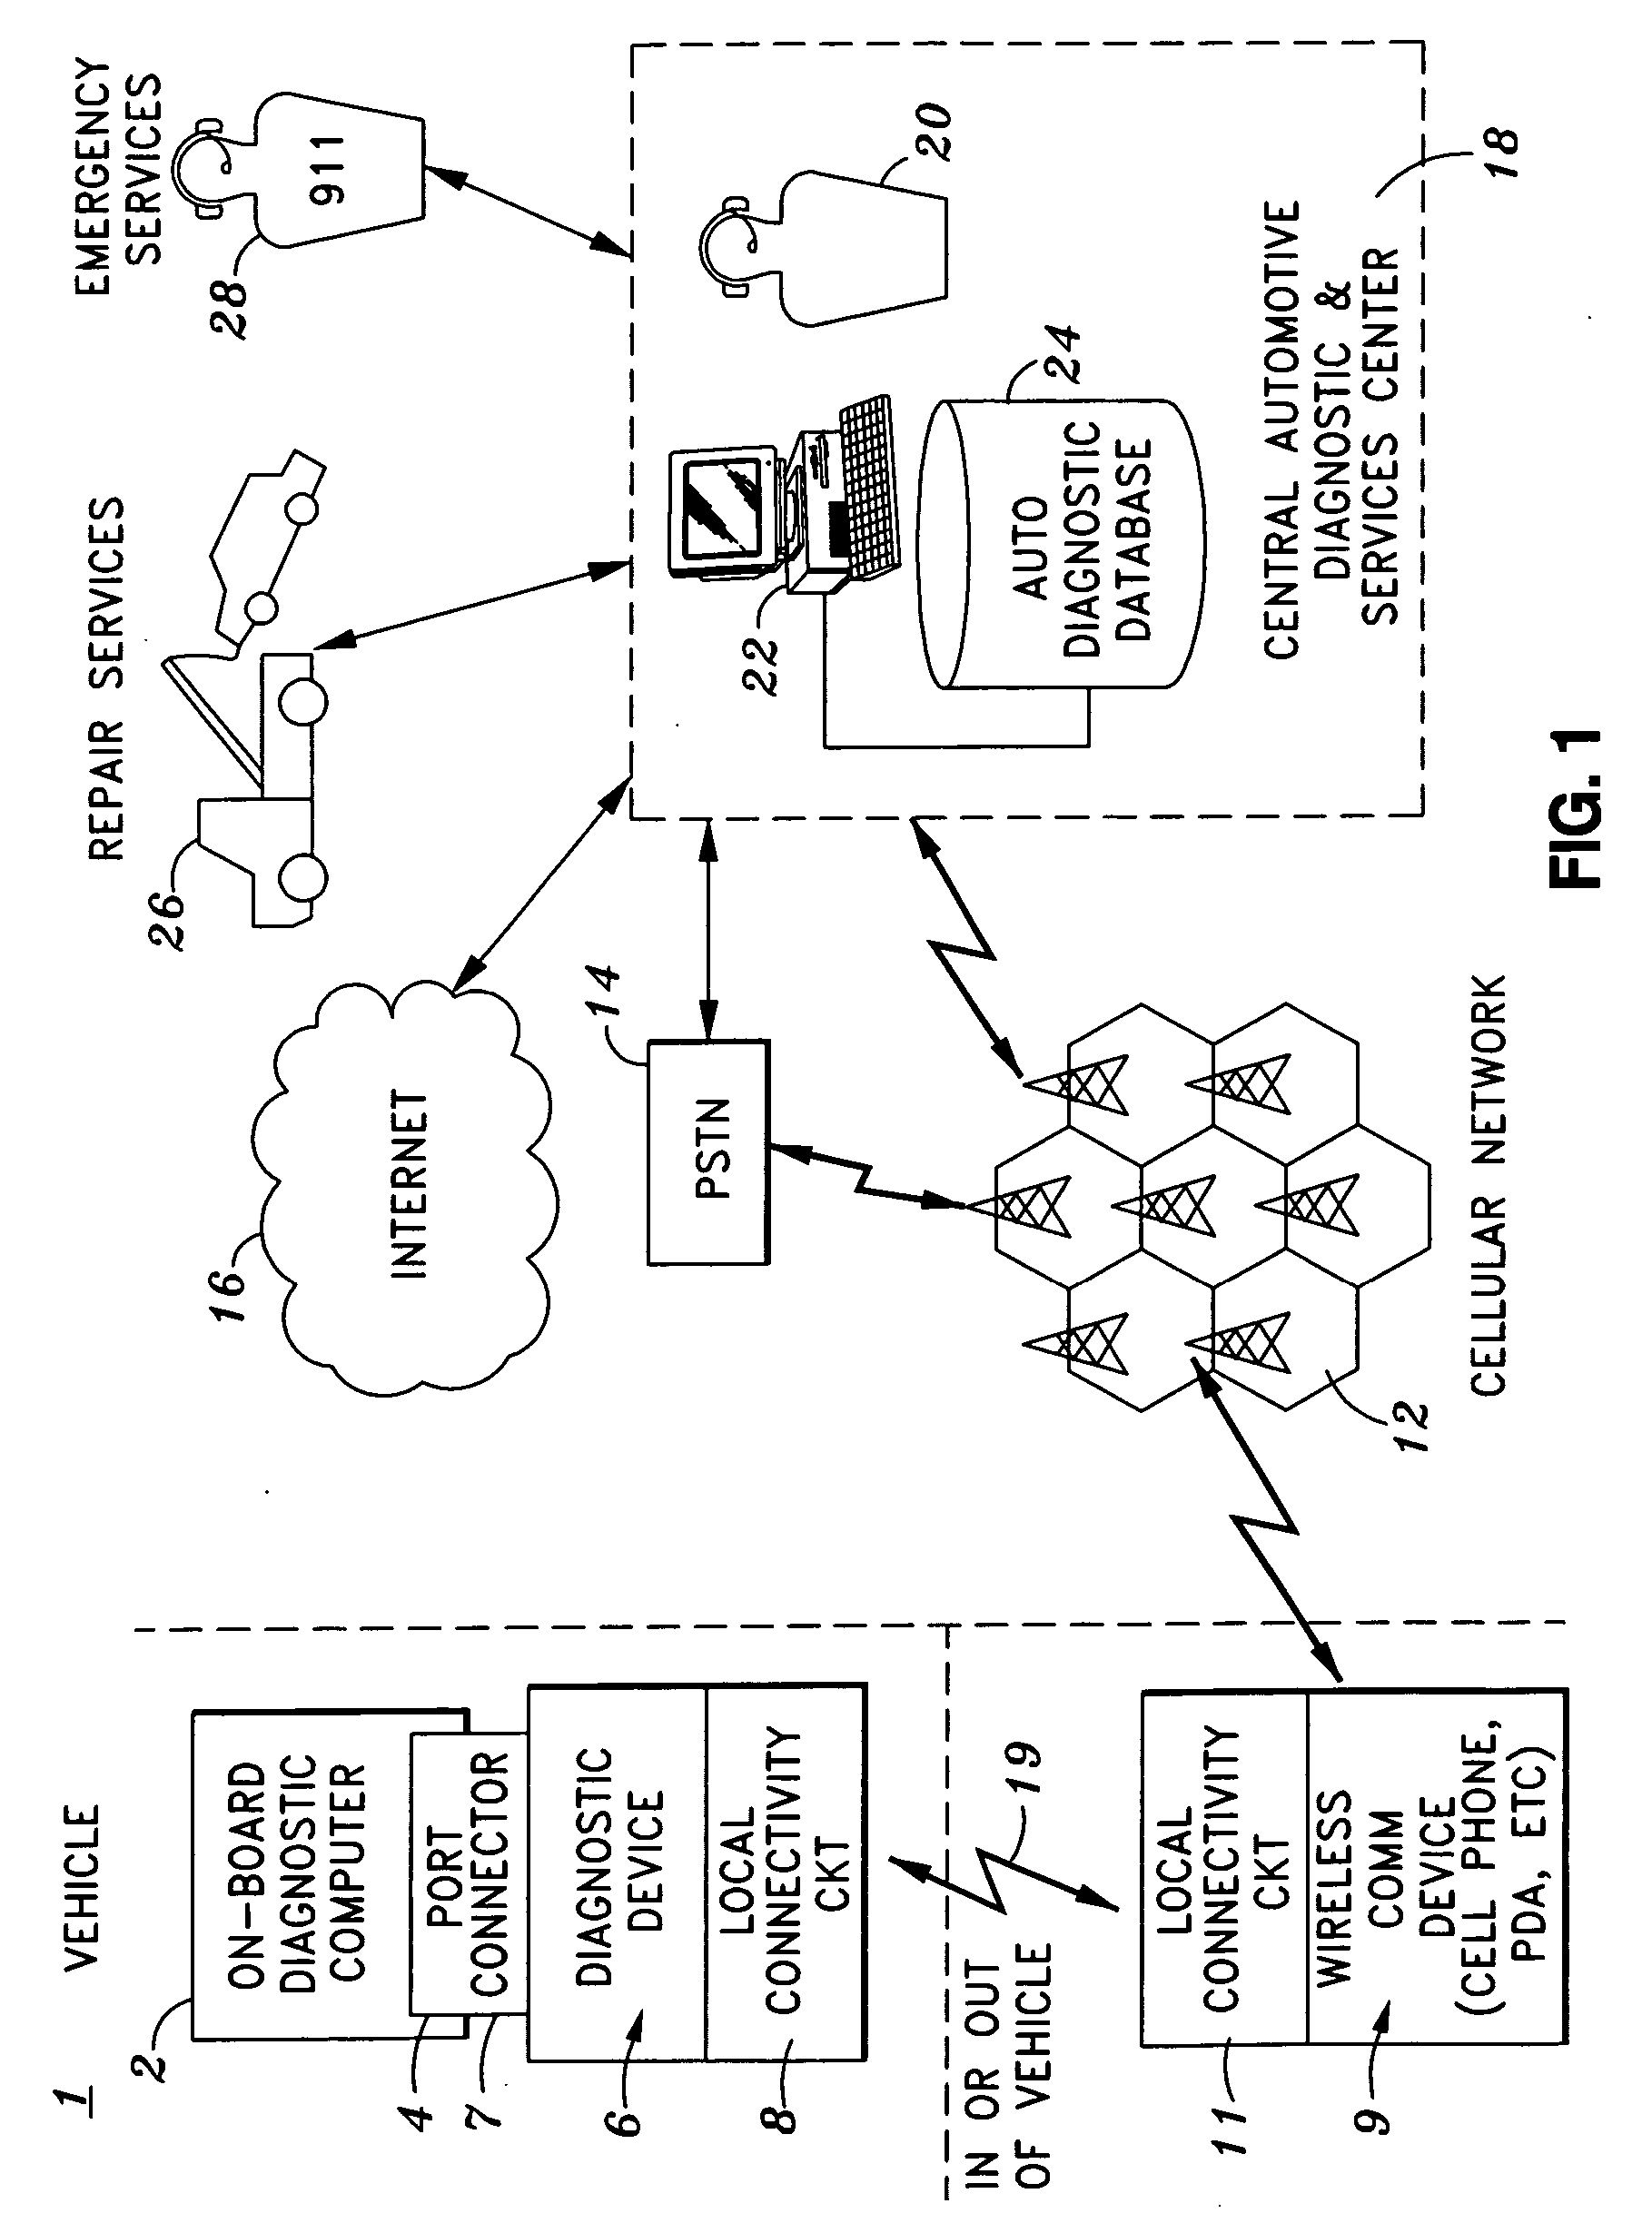 Cellphone based vehicle diagnostic system